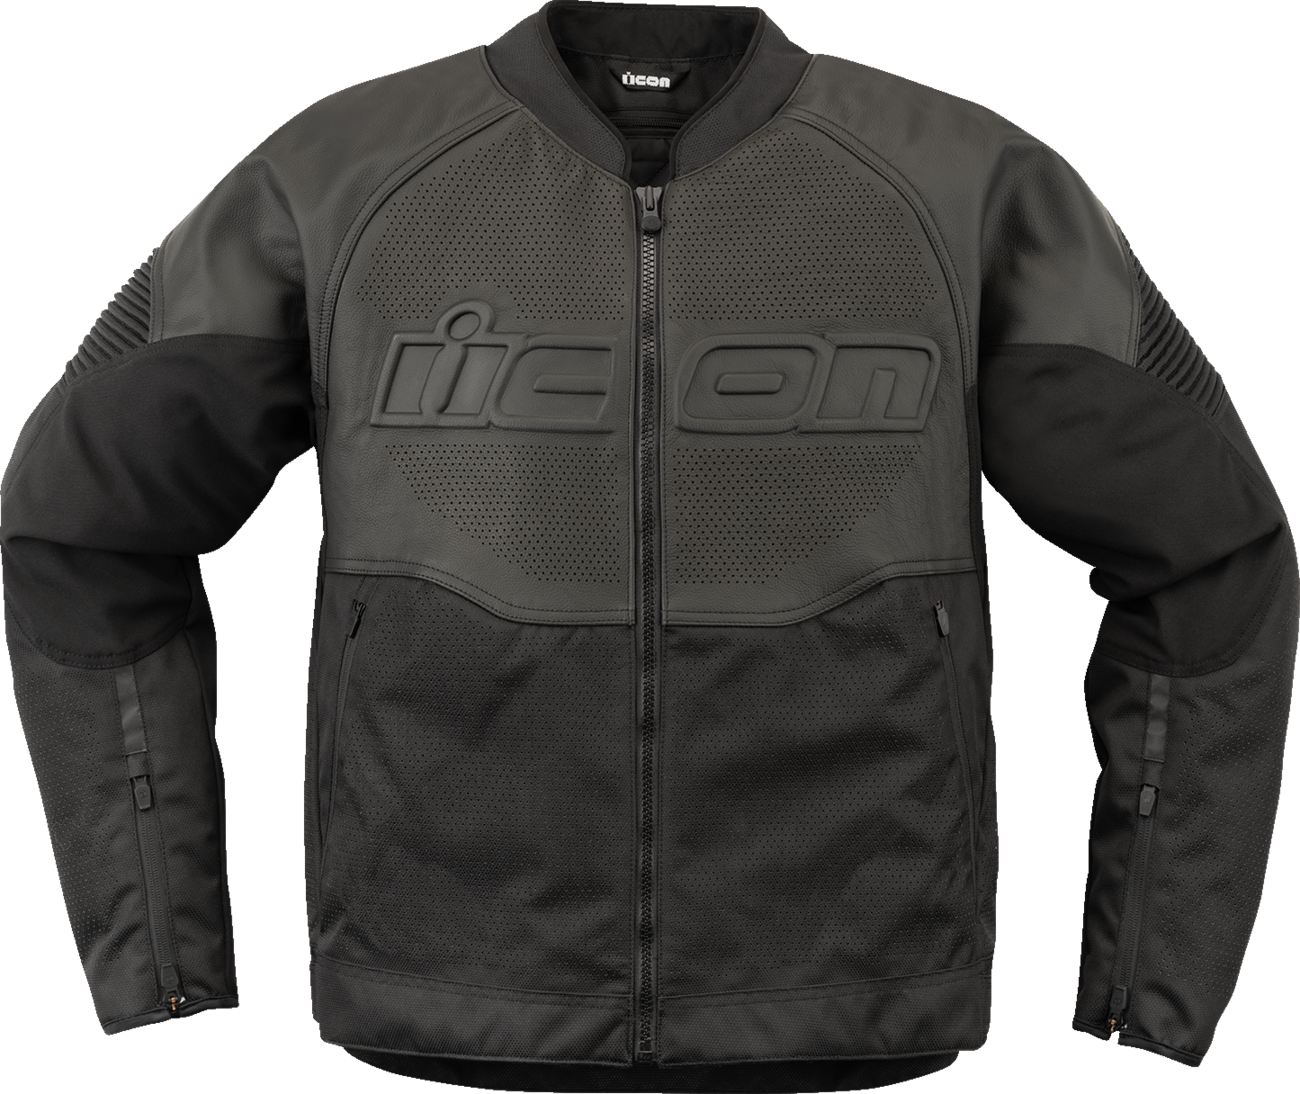 ICON Overlord3™ CE Leather Jacket - Black - Small 2810-4112